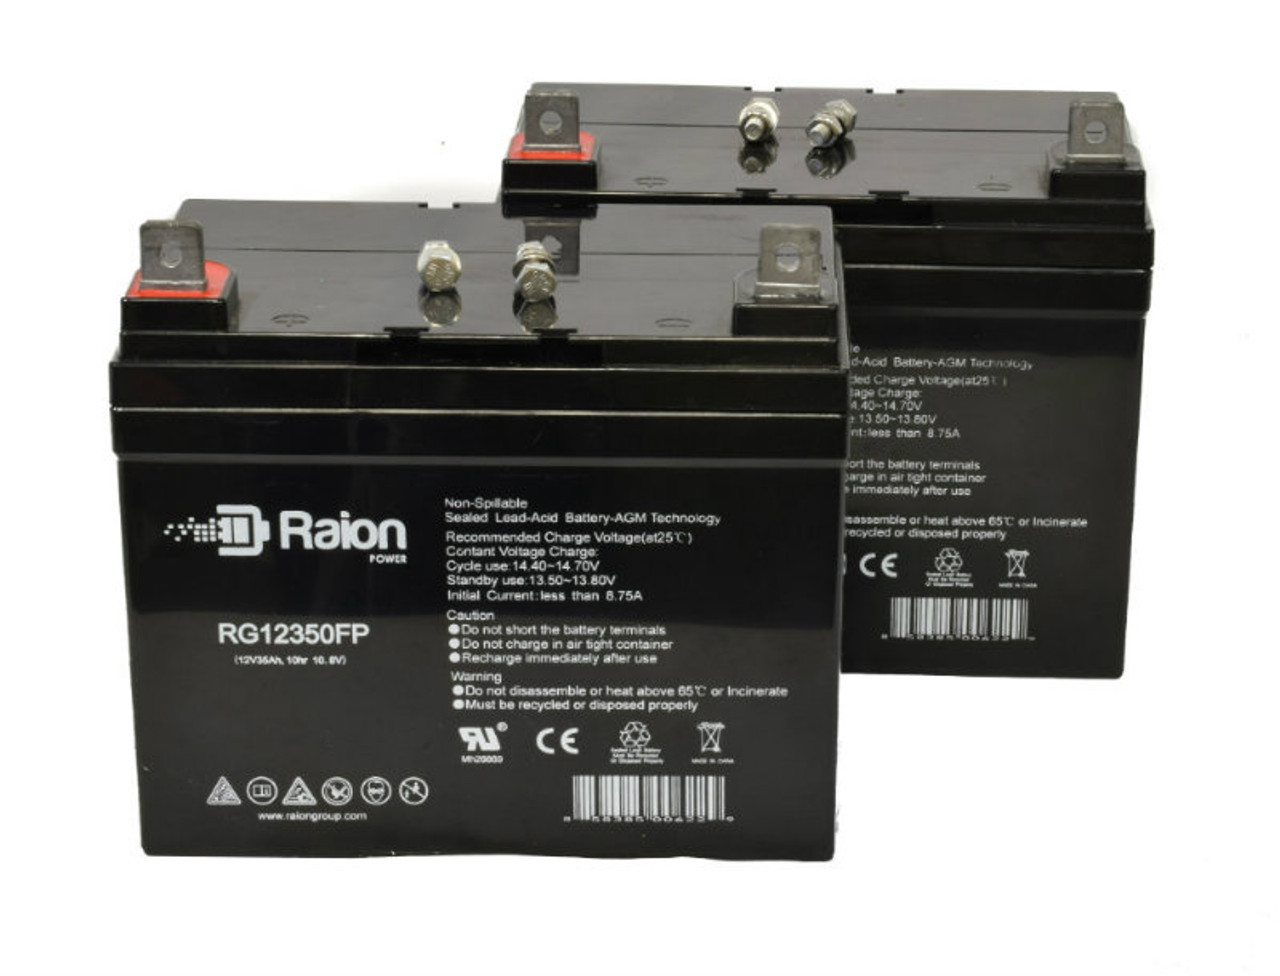 Raion Power Replacement 12V 35Ah Lawn Mower Battery for Ingersoll Equipment 4118 - 2 Pack